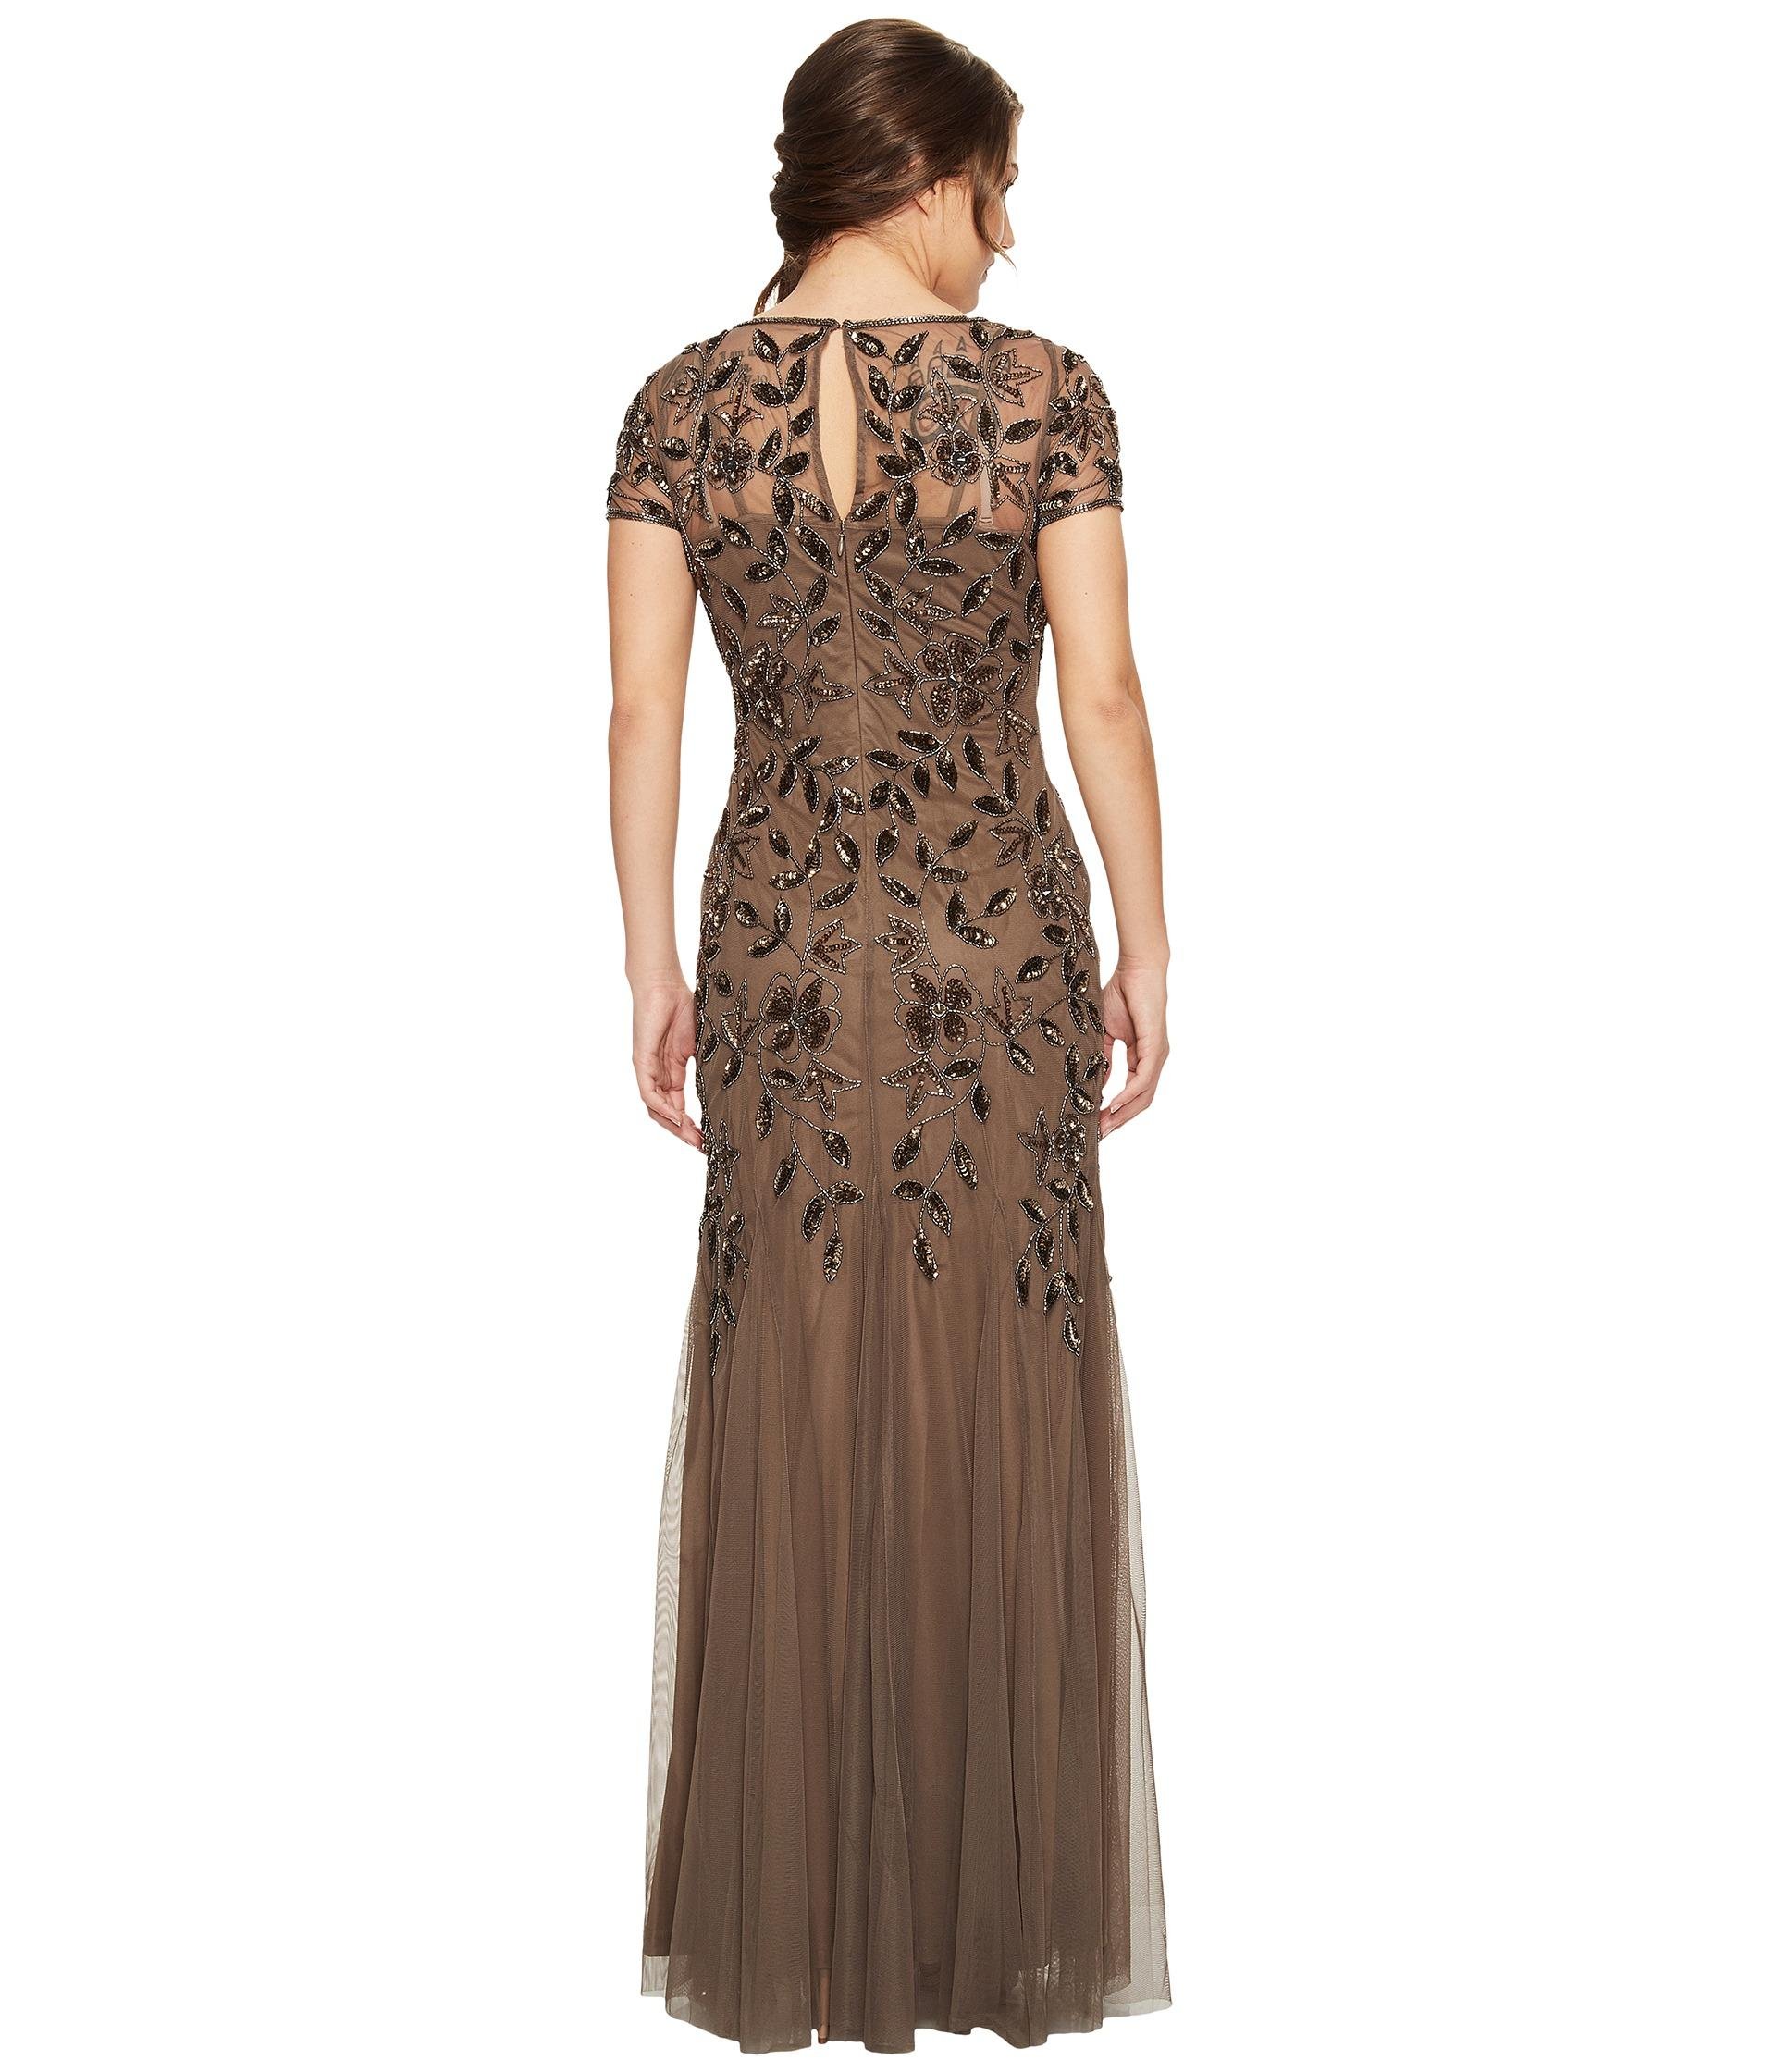 Lyst - Adrianna Papell Petite Floral Beaded Gown